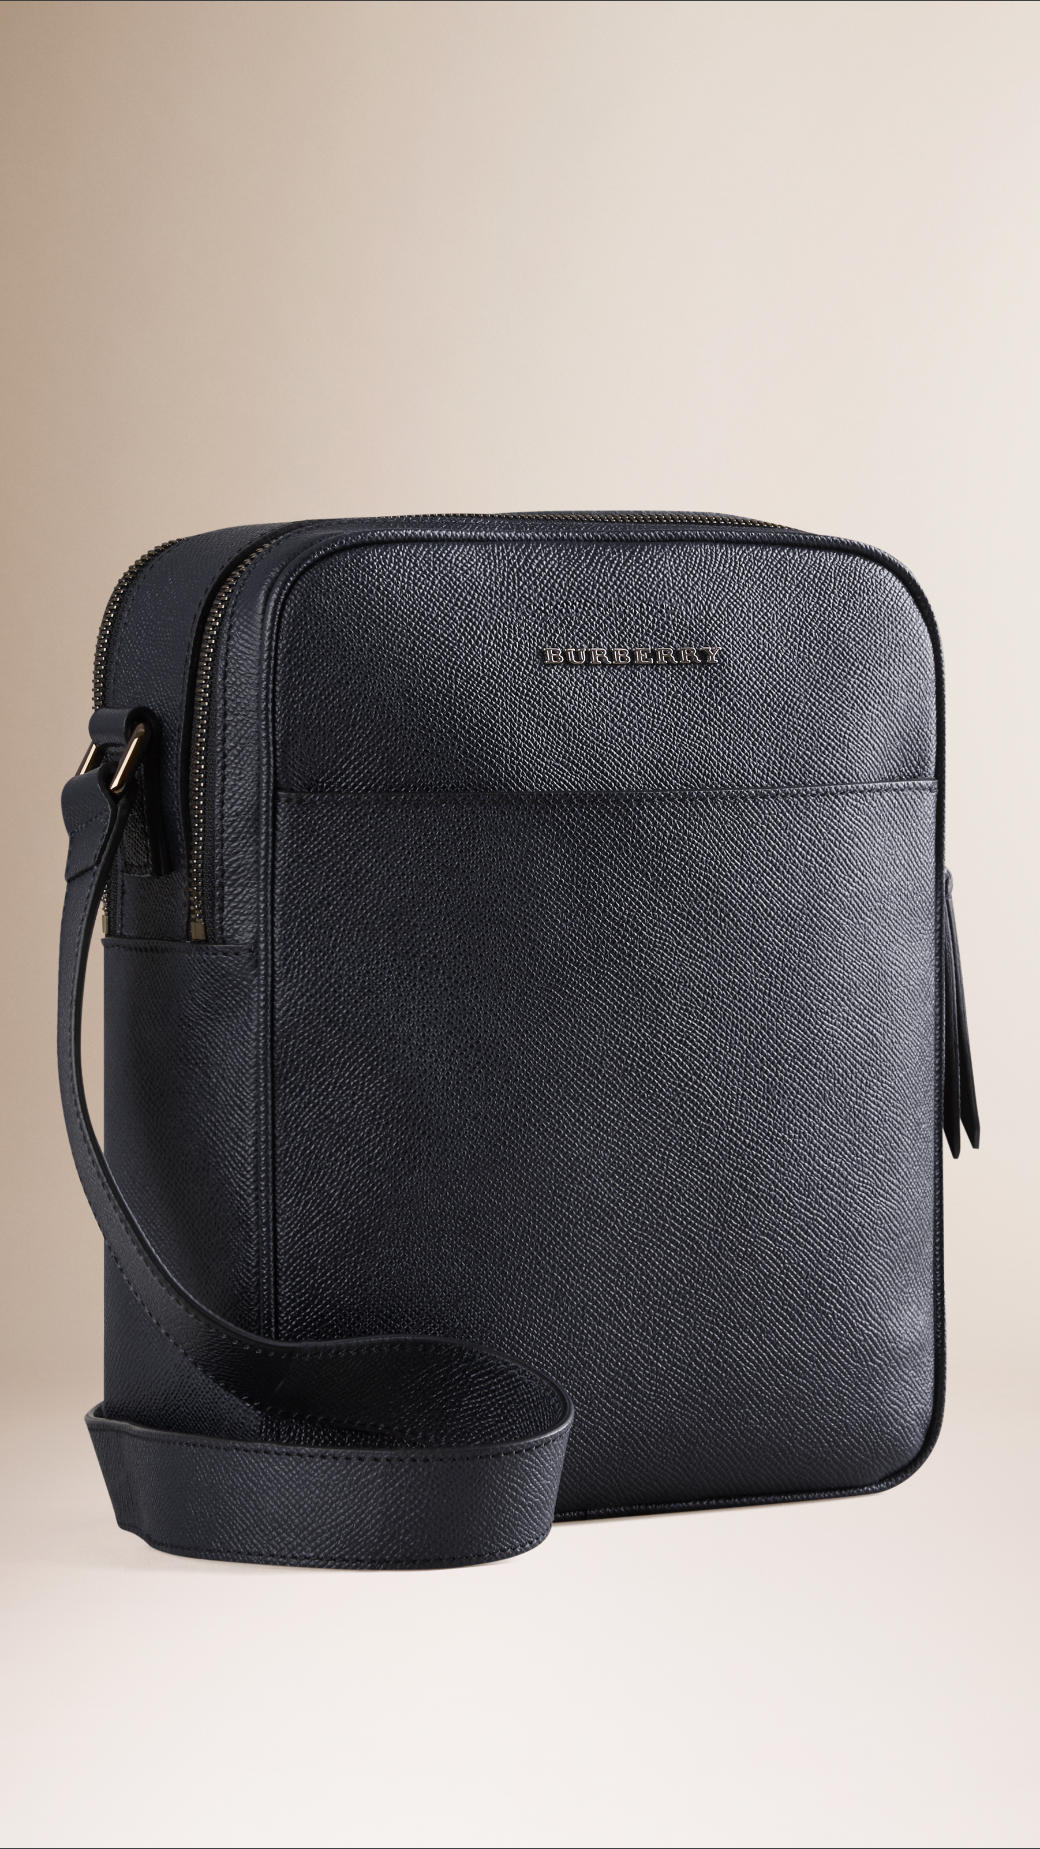 Lyst - Burberry London Leather Crossbody Bag in Blue for Men